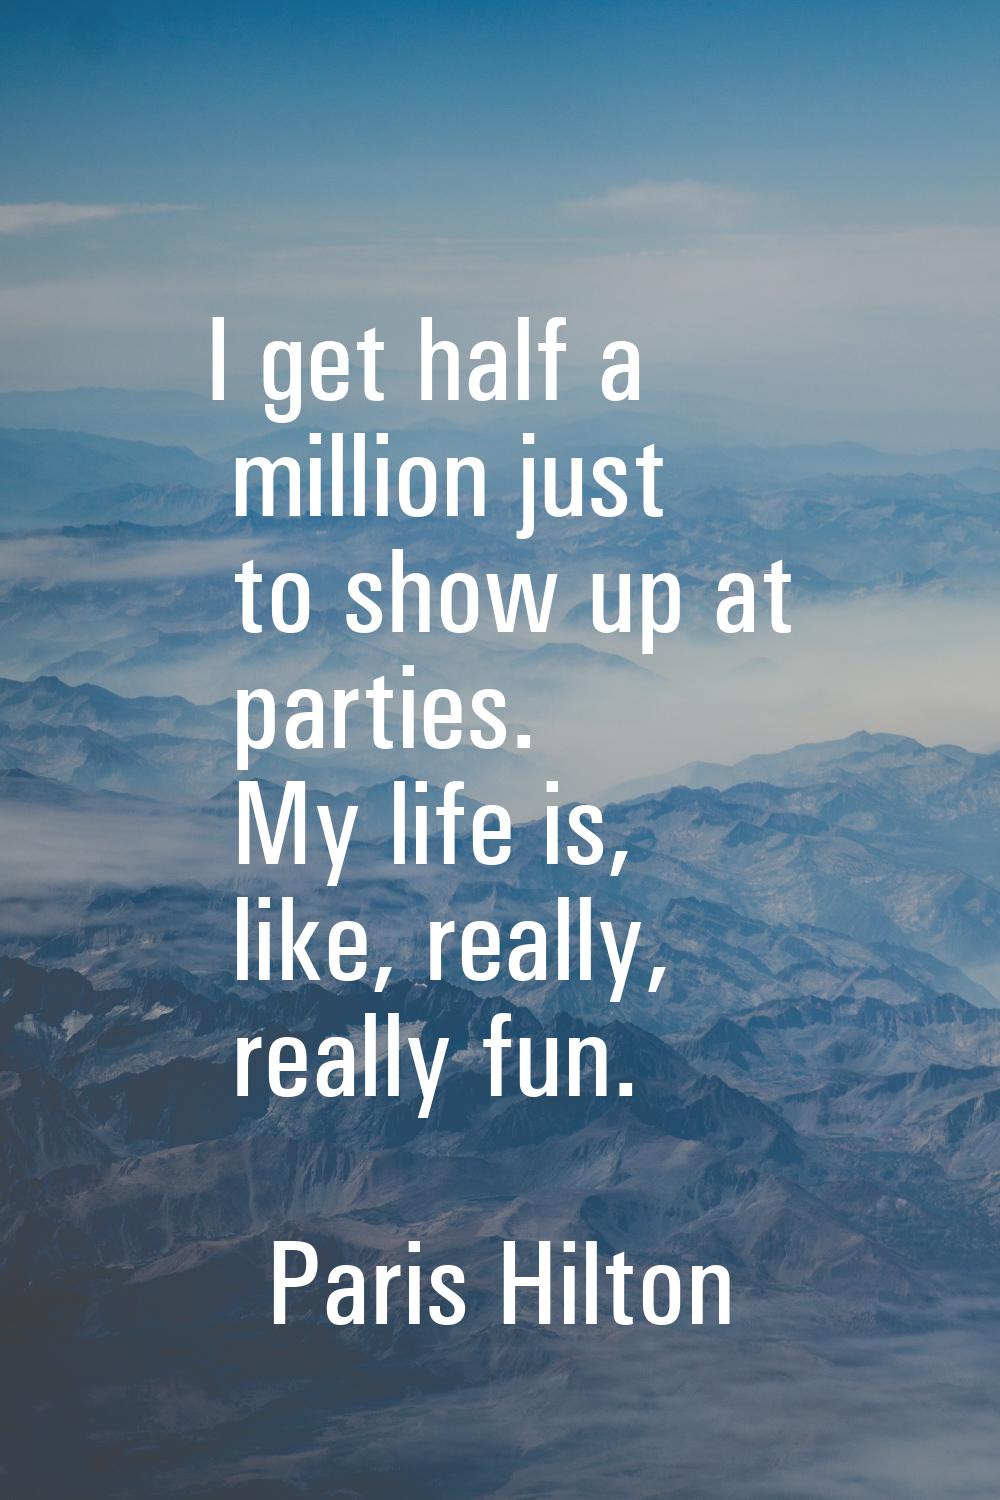 I get half a million just to show up at parties. My life is, like, really, really fun.